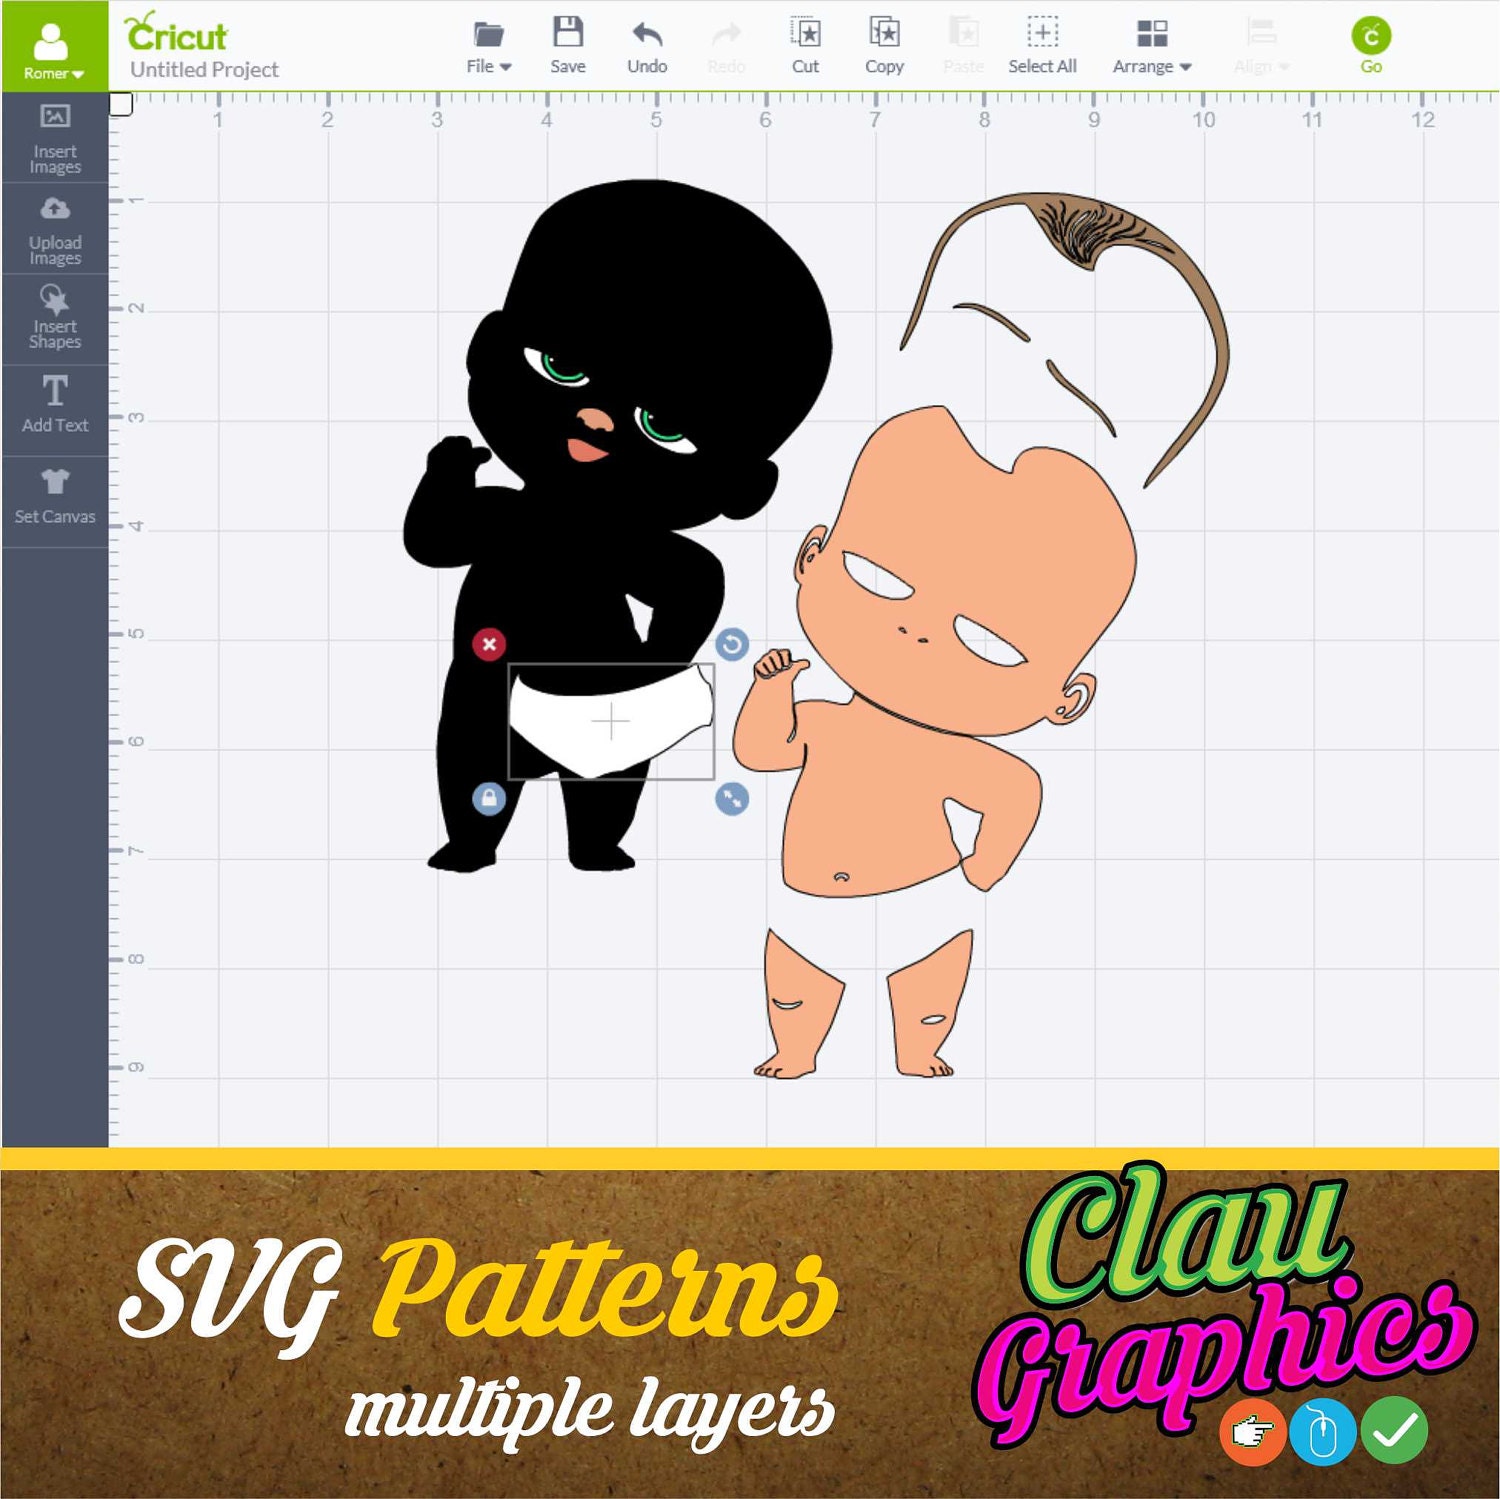 Download The Boss Baby Movie clipart, Digital Illustrations on ...